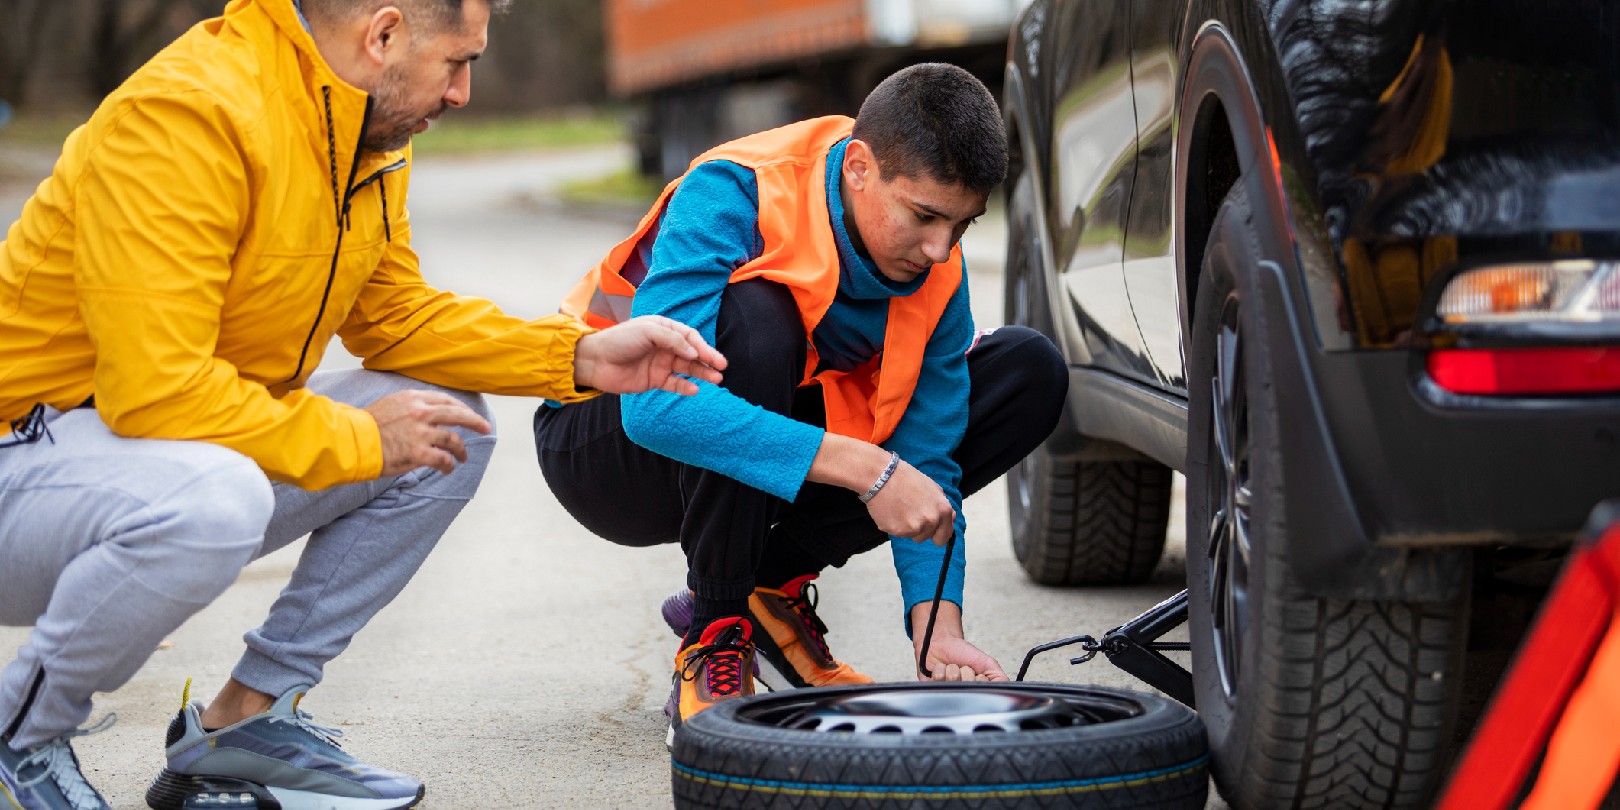 How To Fix a Flat Tire Yourself in 5 Steps - Old Cars Weekly